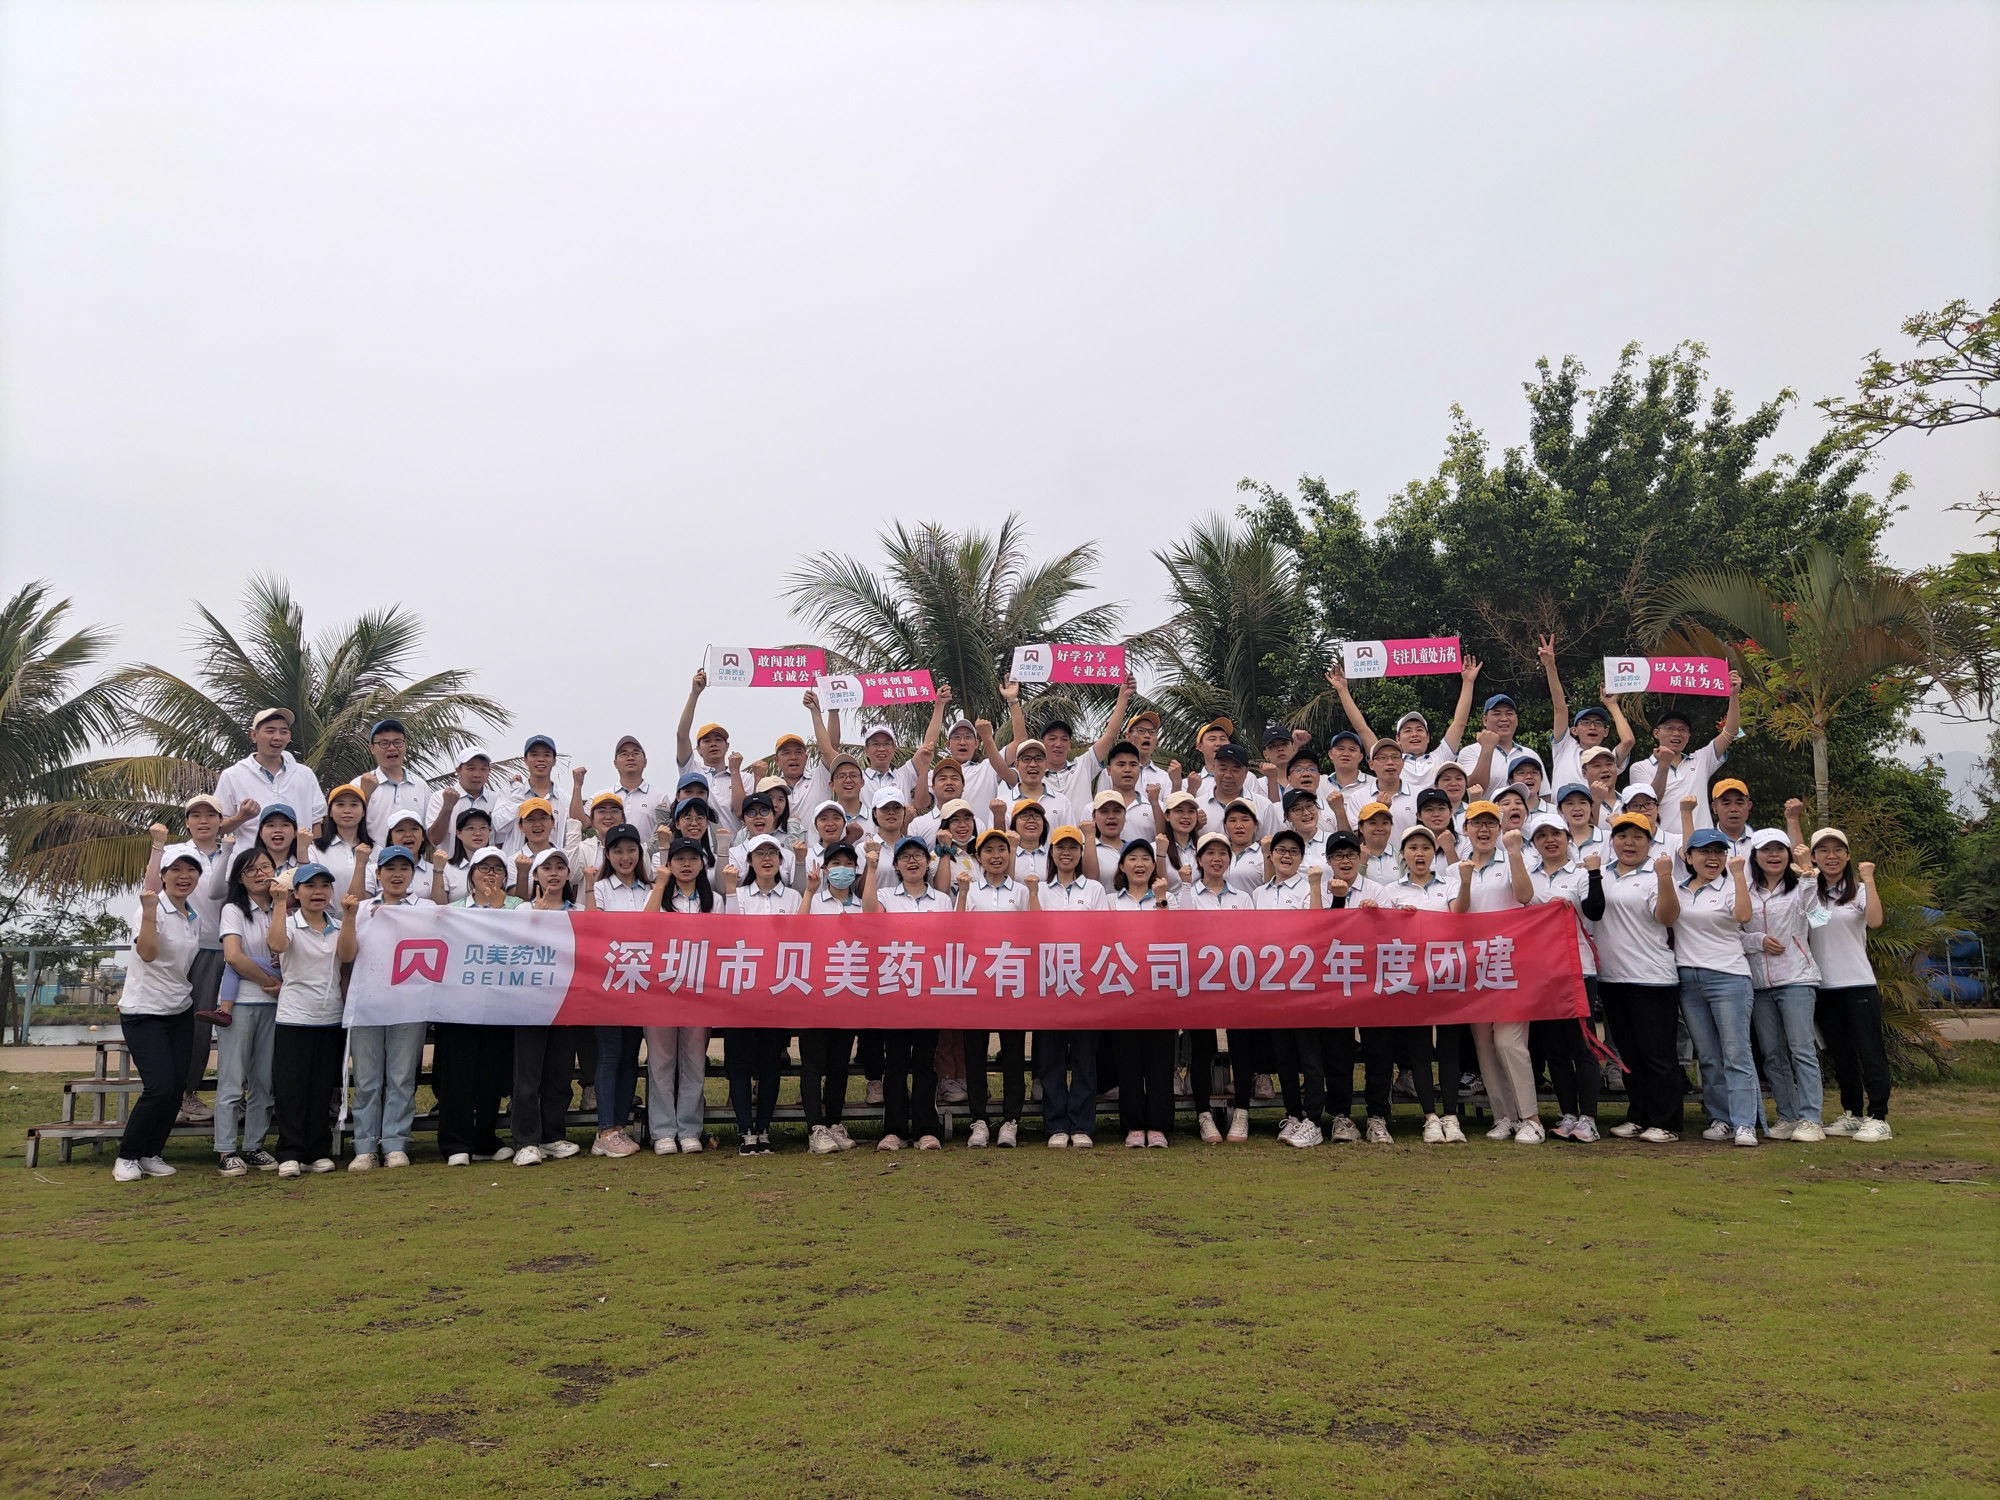 A Snapshot of Beimei's 2022 Annual   Team Building Activity